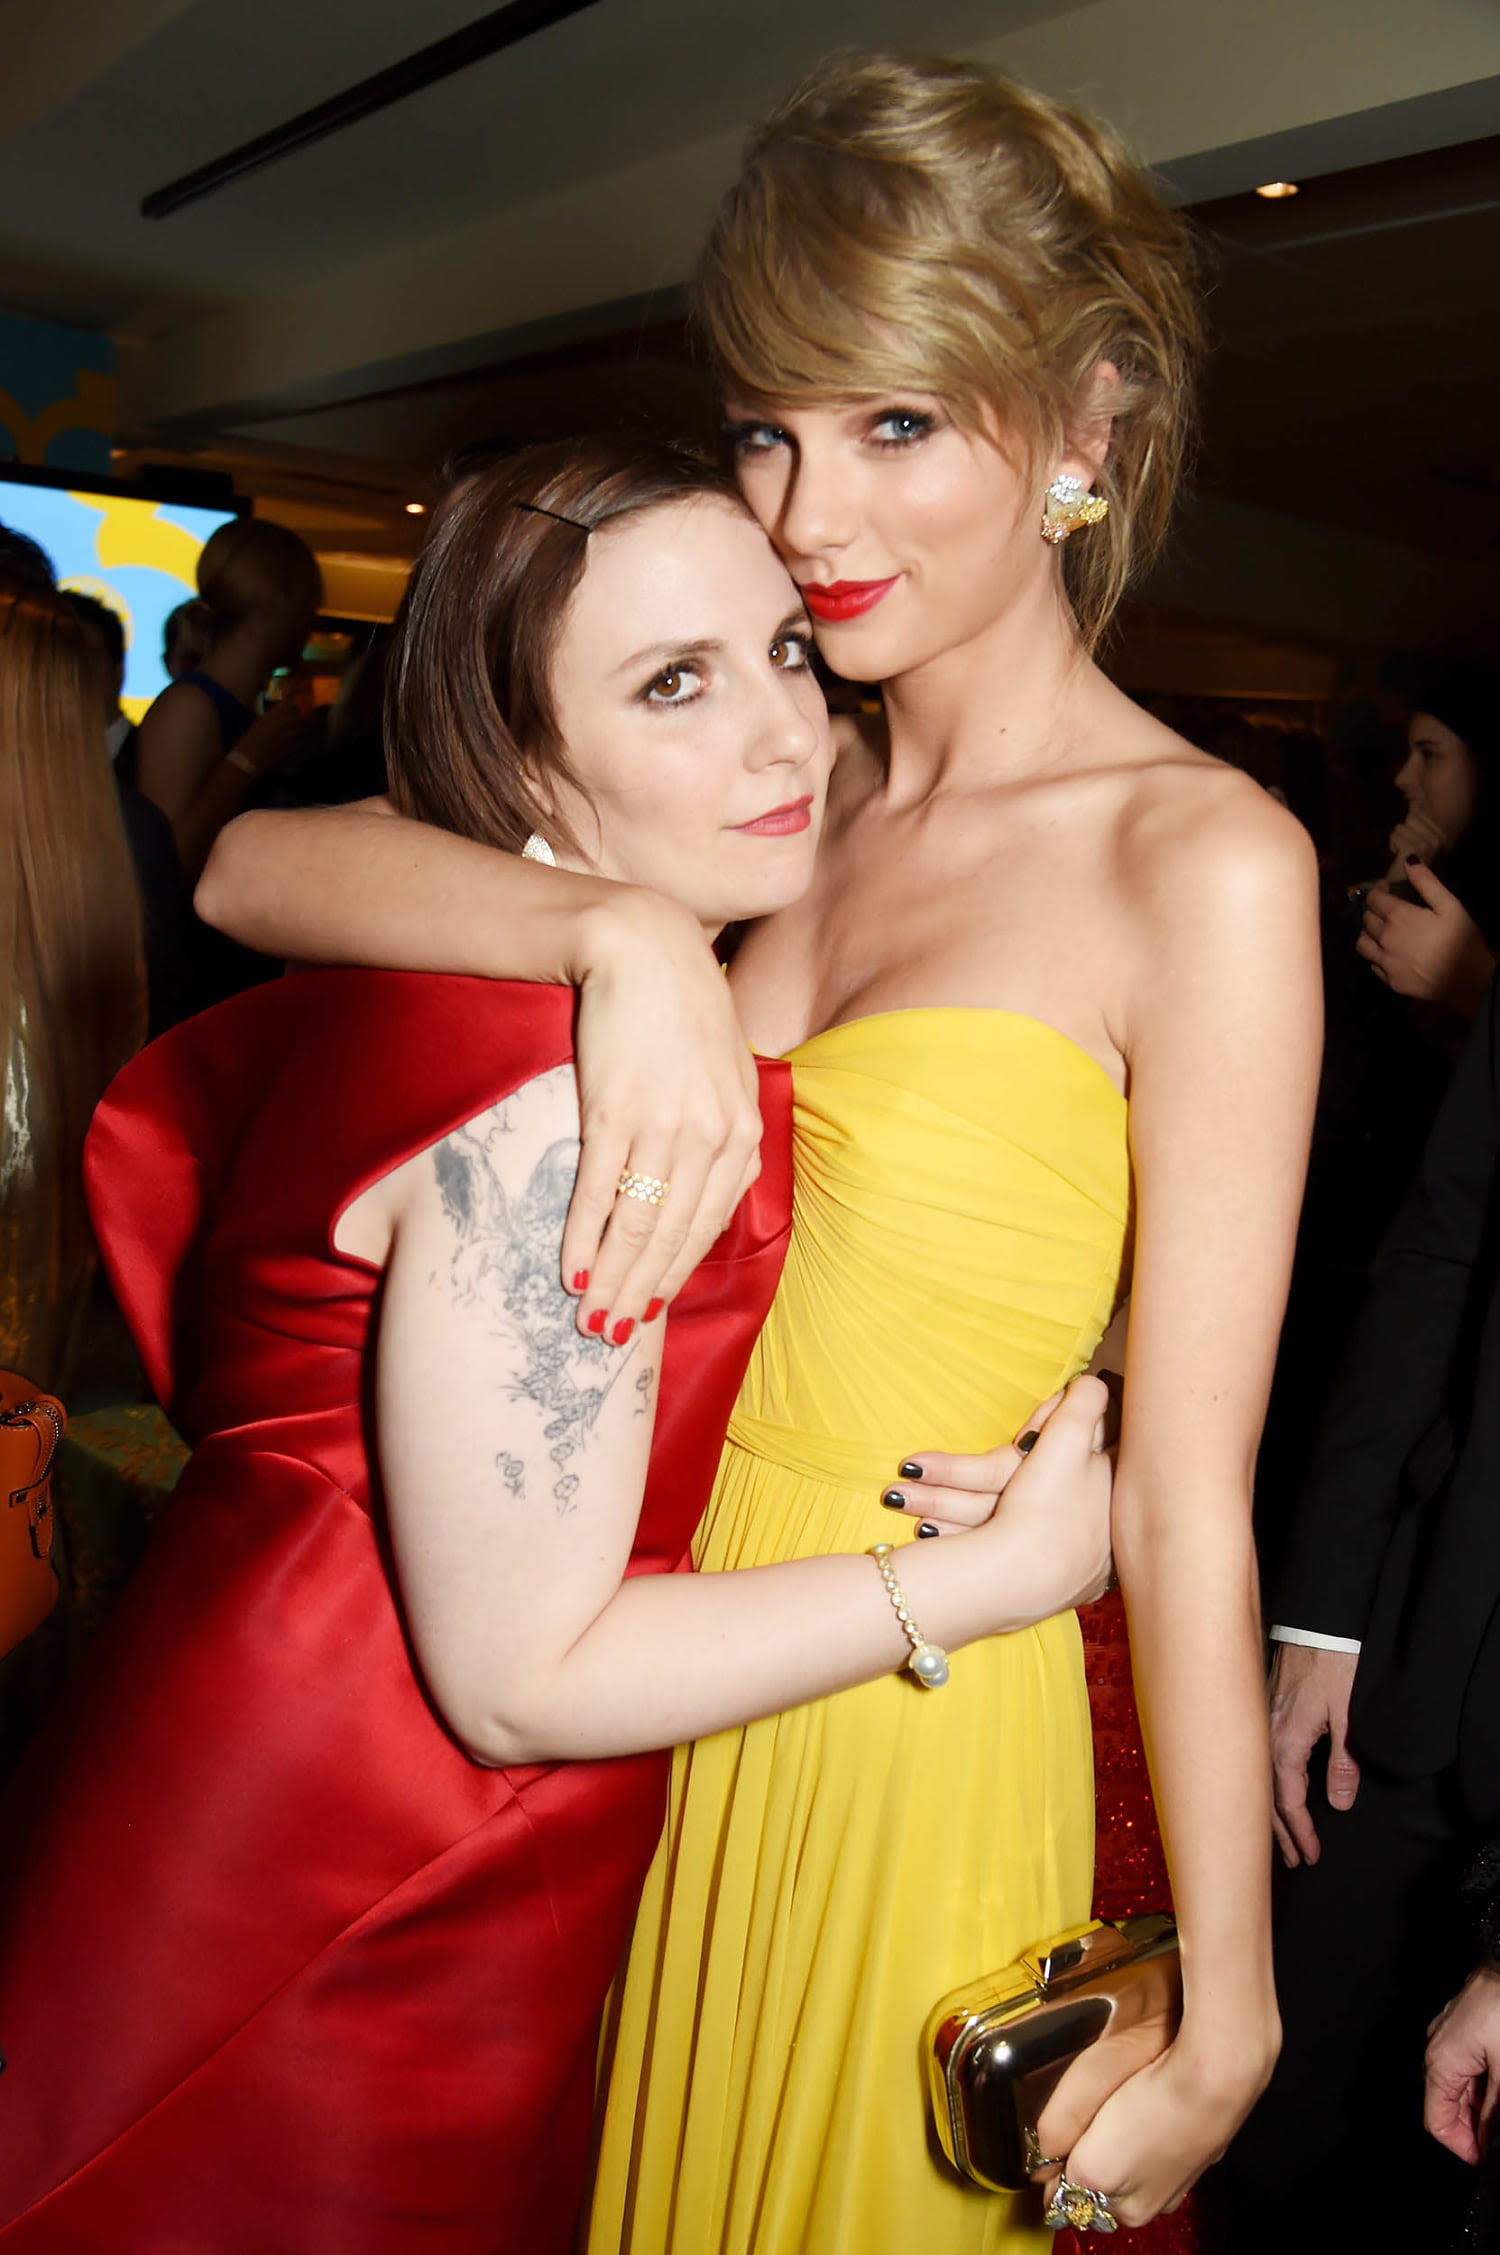 Lena Dunham shares the 2 questions she gets 'most in life' as Taylor Swift's friend